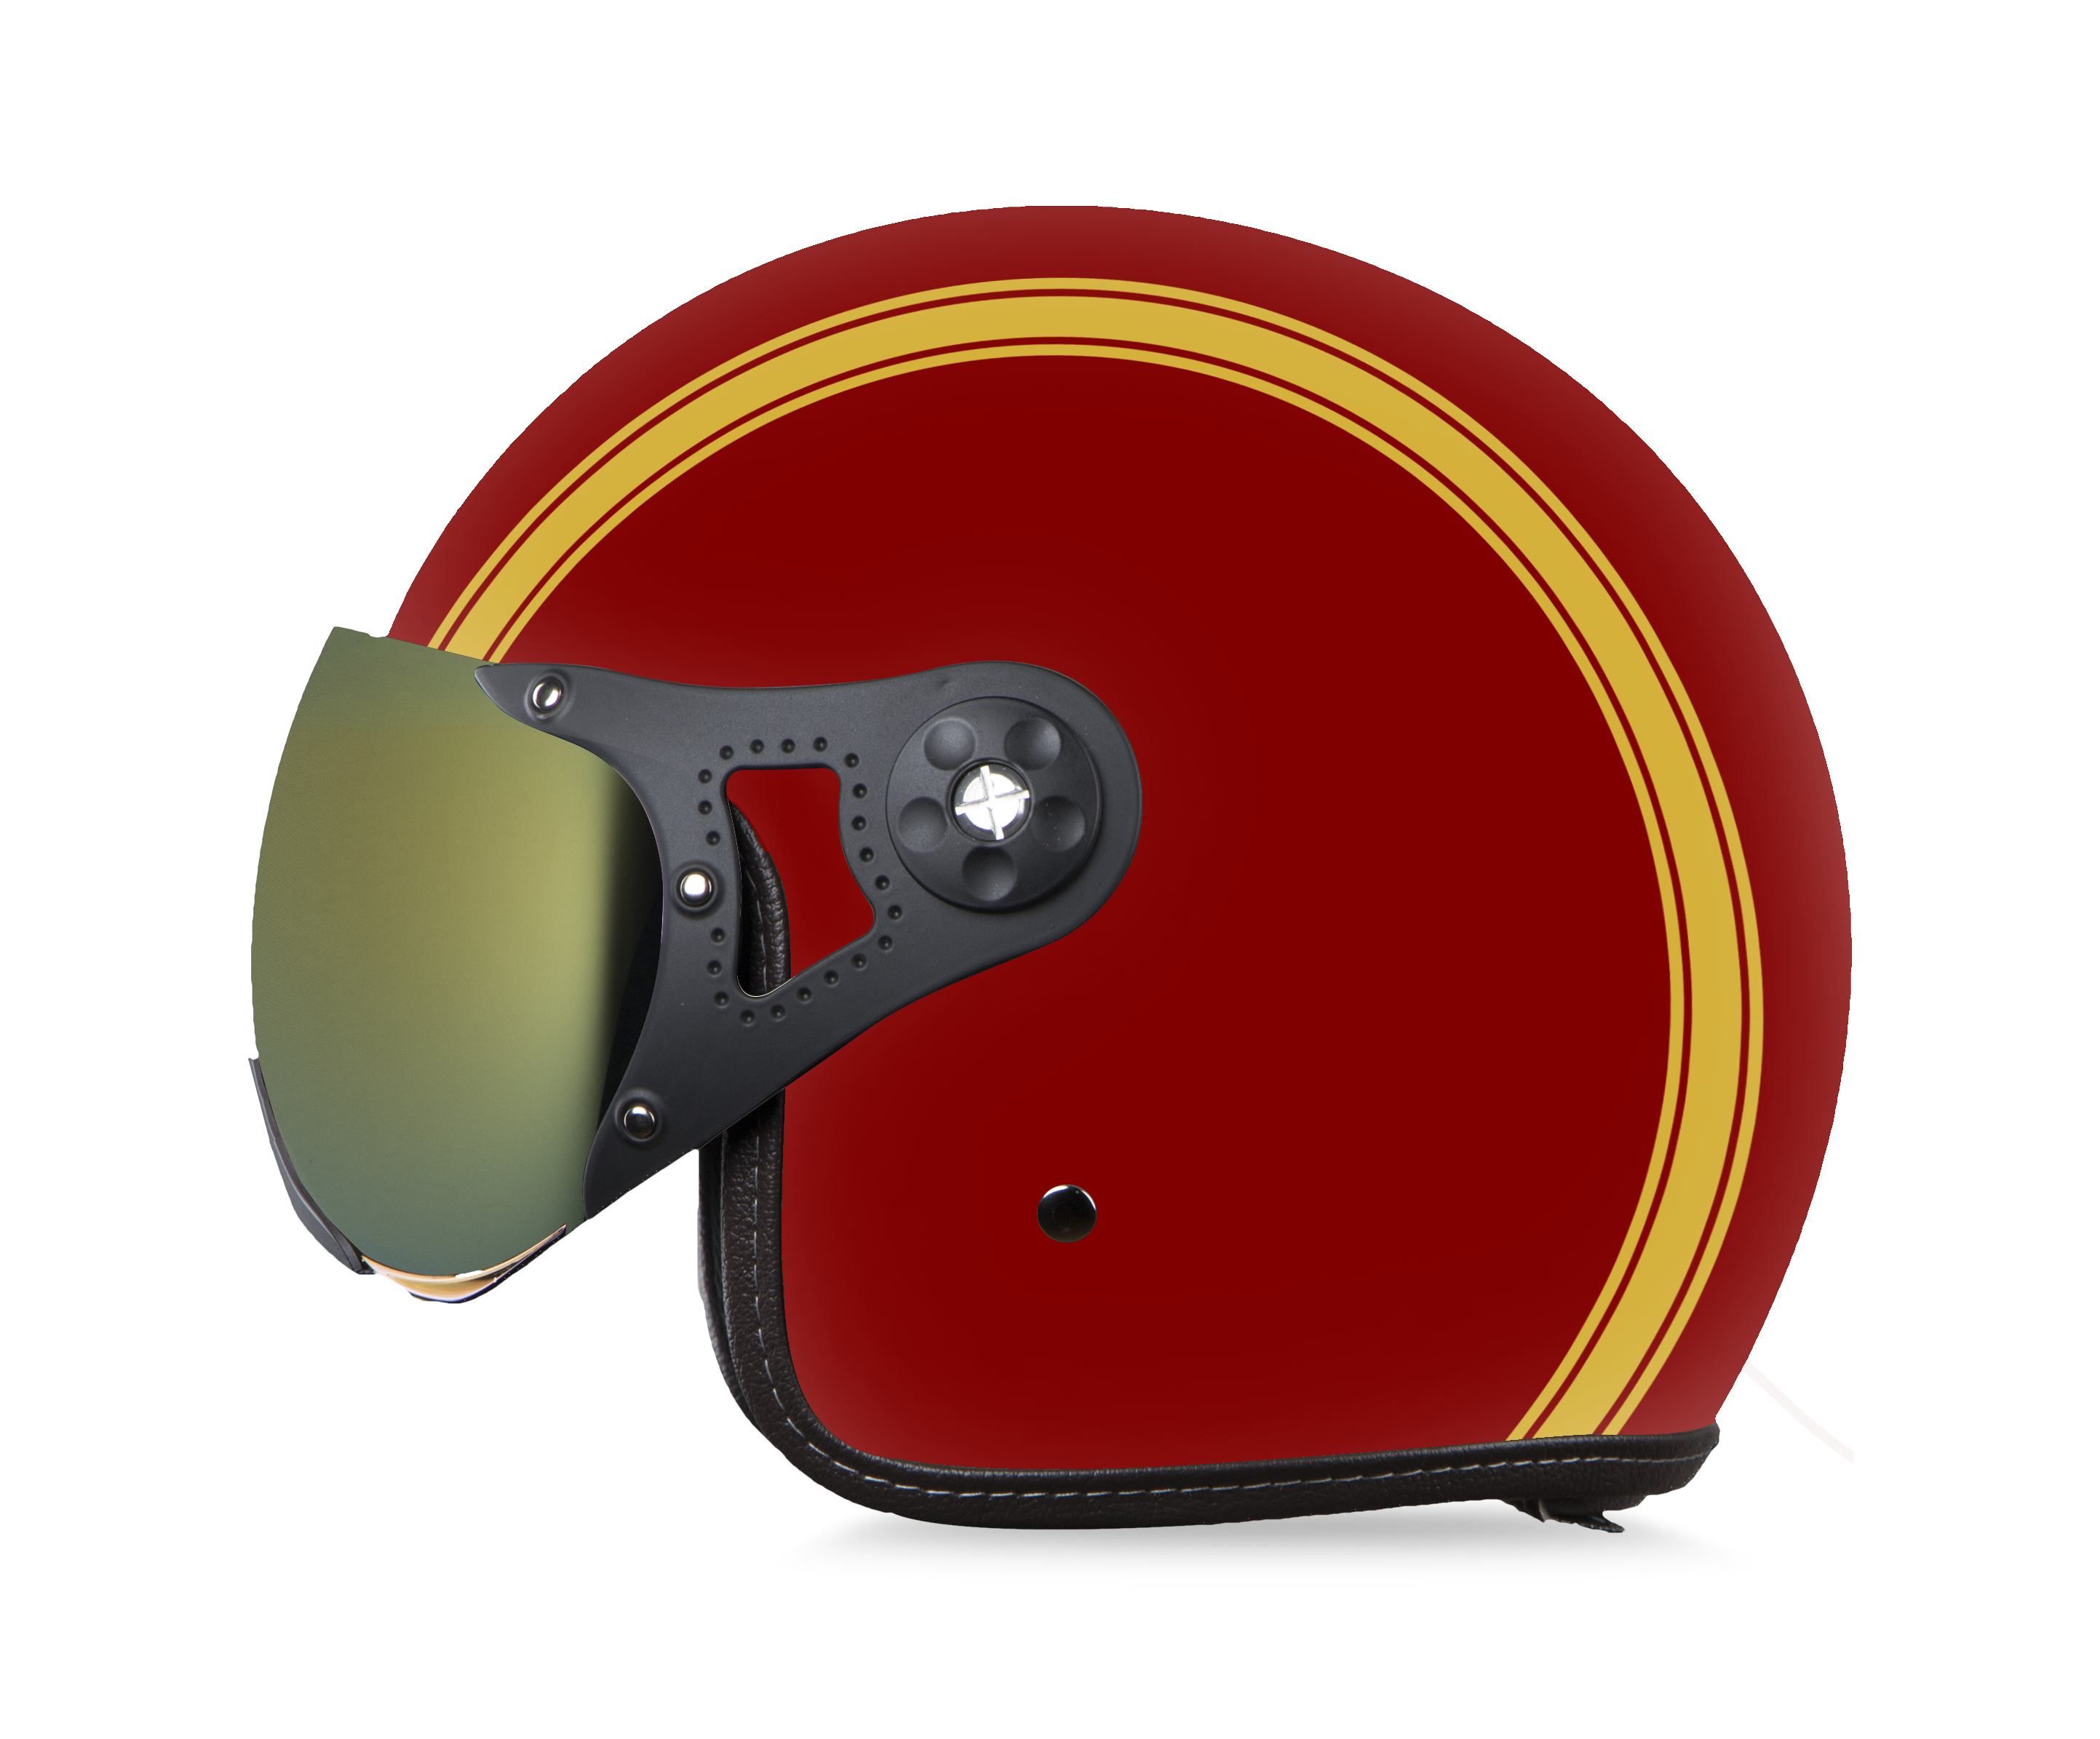 SB-40 DOT STRIPE MAT MAROON WITH GOLD (WITH EXTRA CLEAR VISOR)